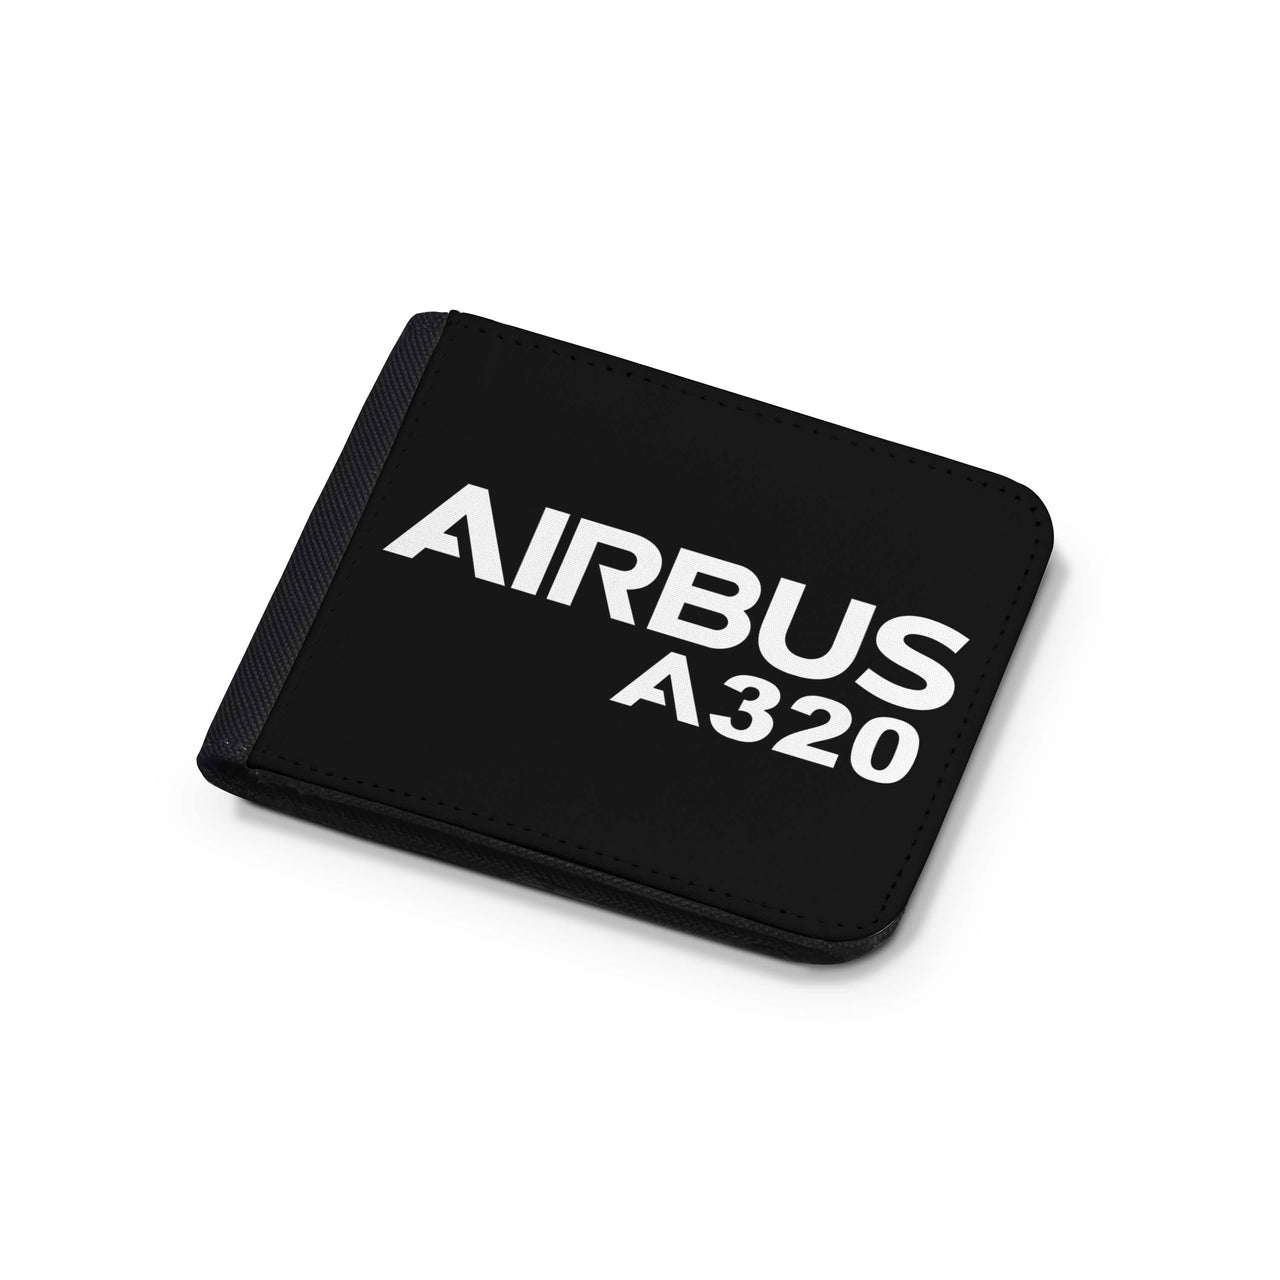 Airbus A320 & Text Designed Wallets